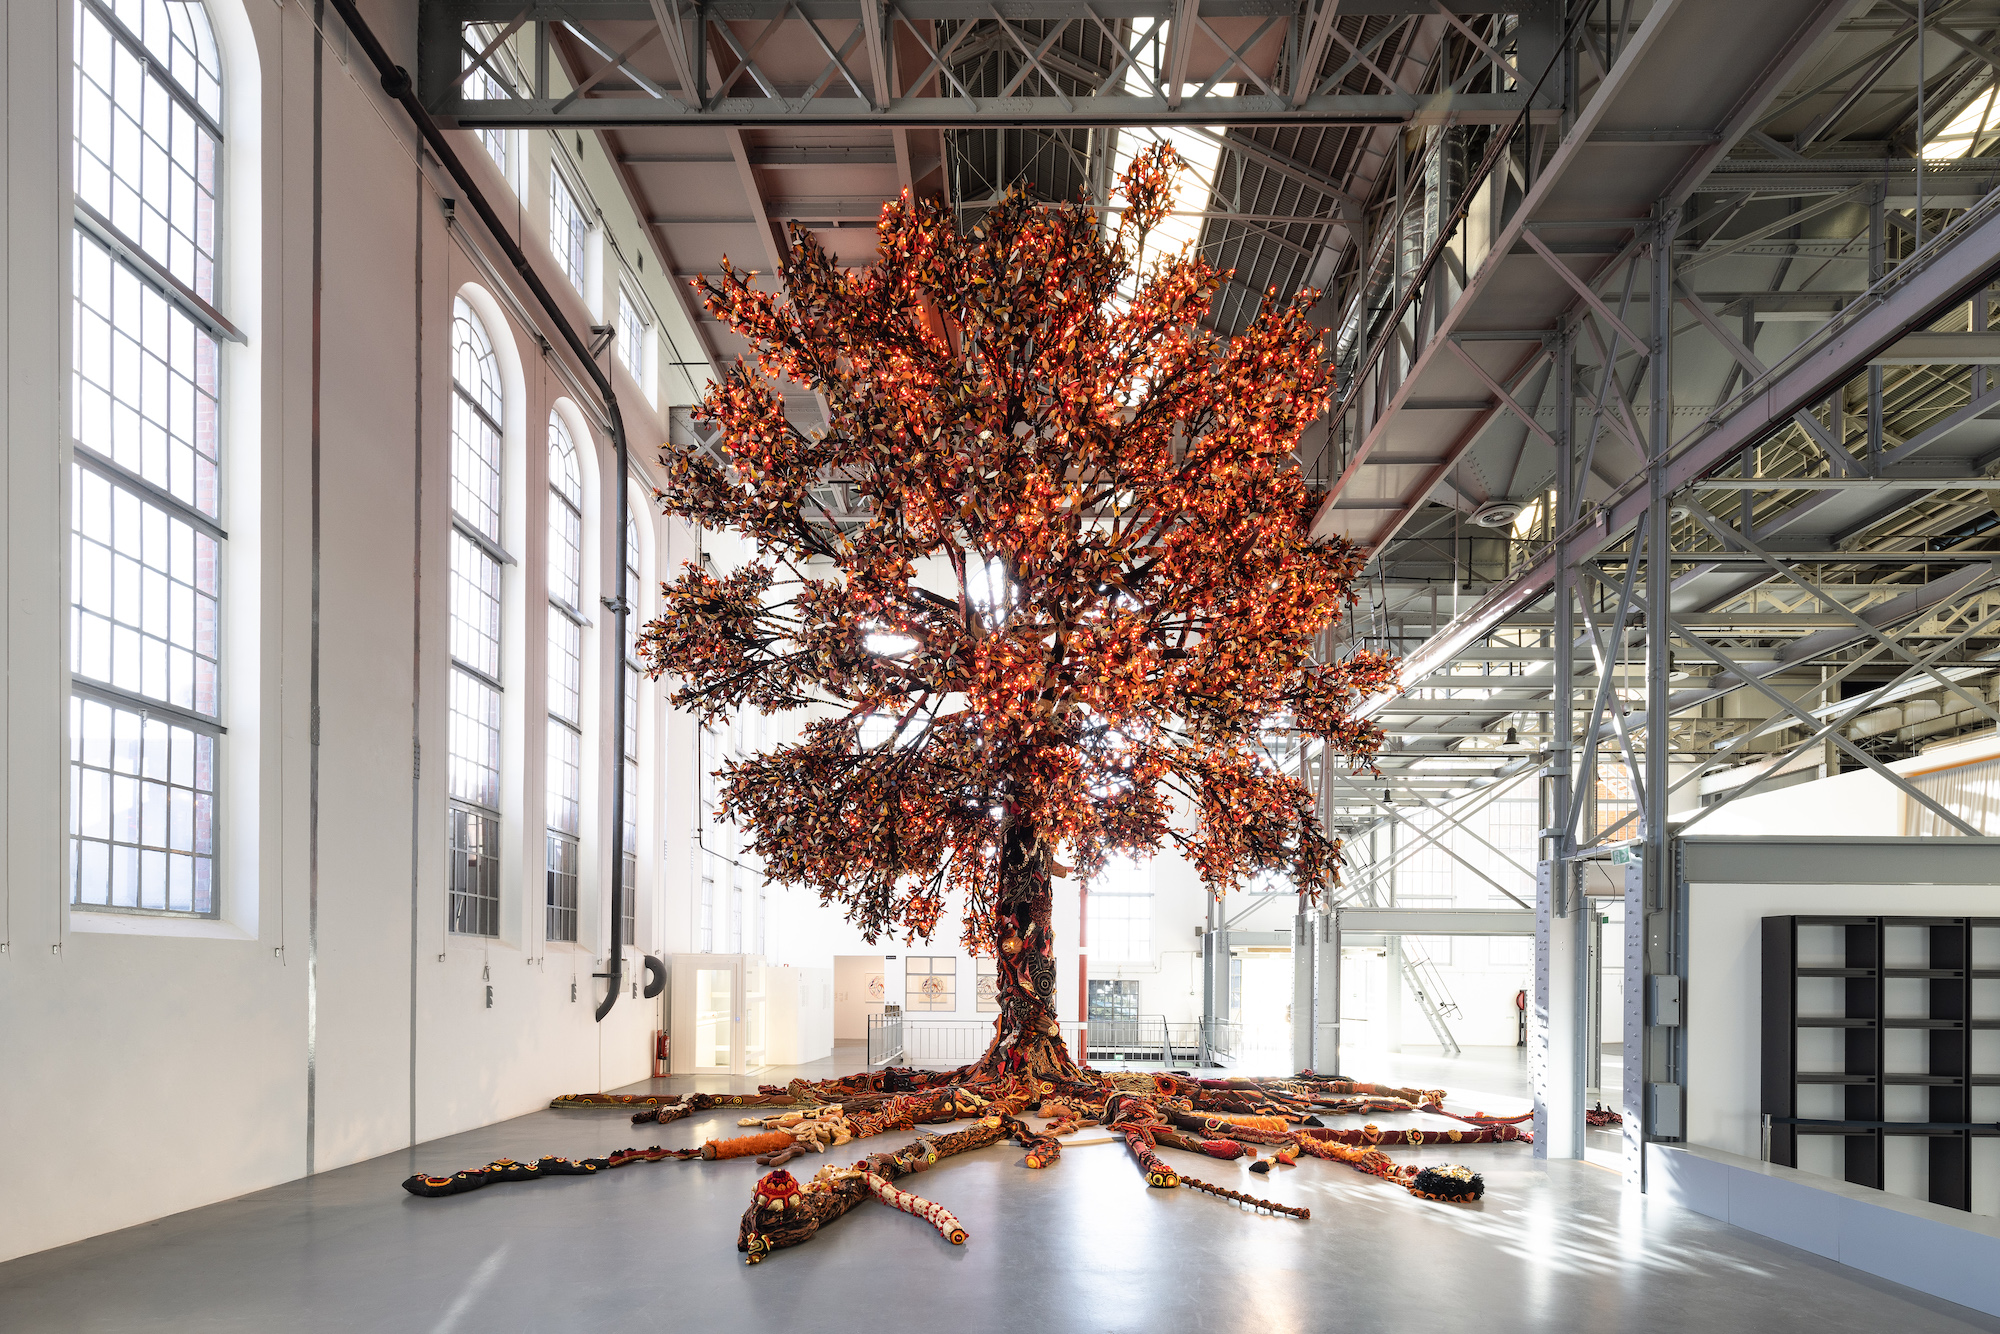 An installation view of a tree sculpture made from fabric.